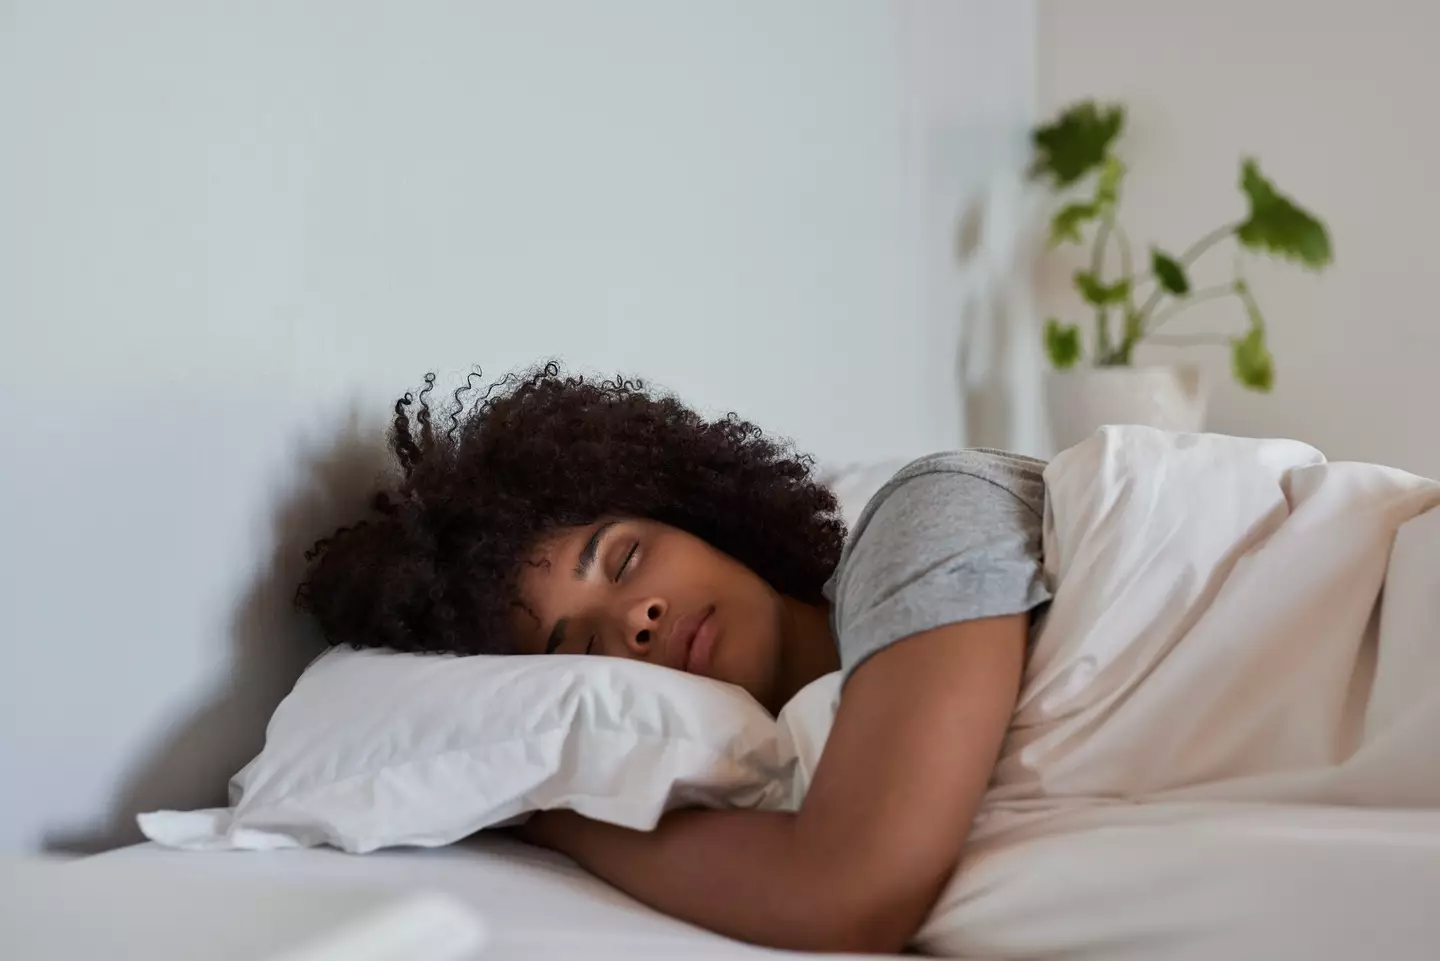 According to a sleep expert, there's a specific turning point when you need to swap over.